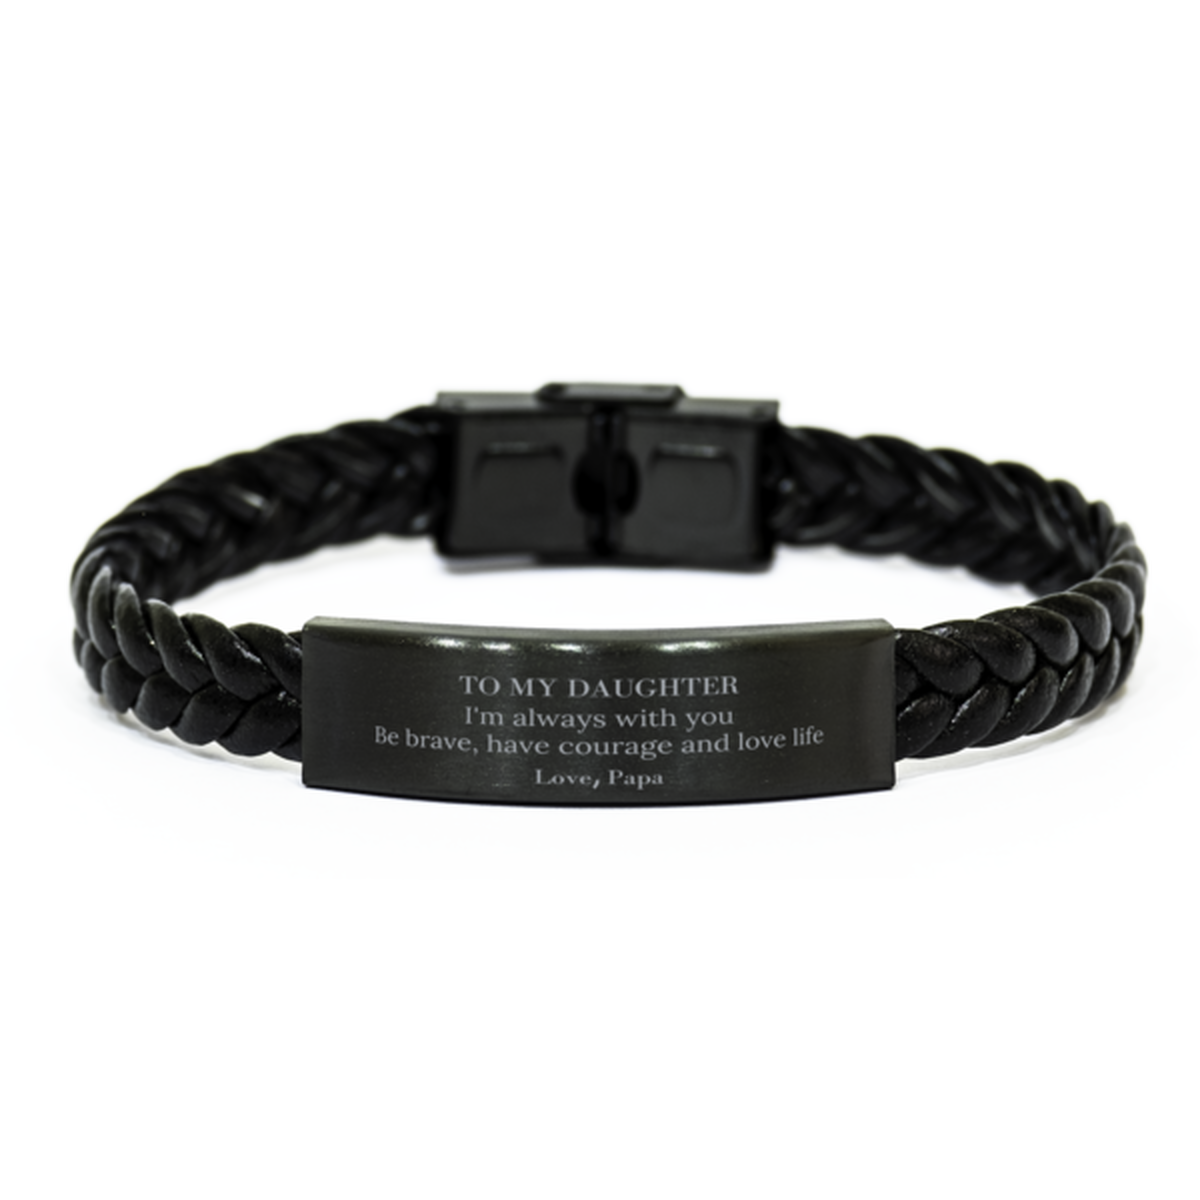 To My Daughter Gifts from Papa, Unique Braided Leather Bracelet Inspirational Christmas Birthday Graduation Gifts for Daughter I'm always with you. Be brave, have courage and love life. Love, Papa